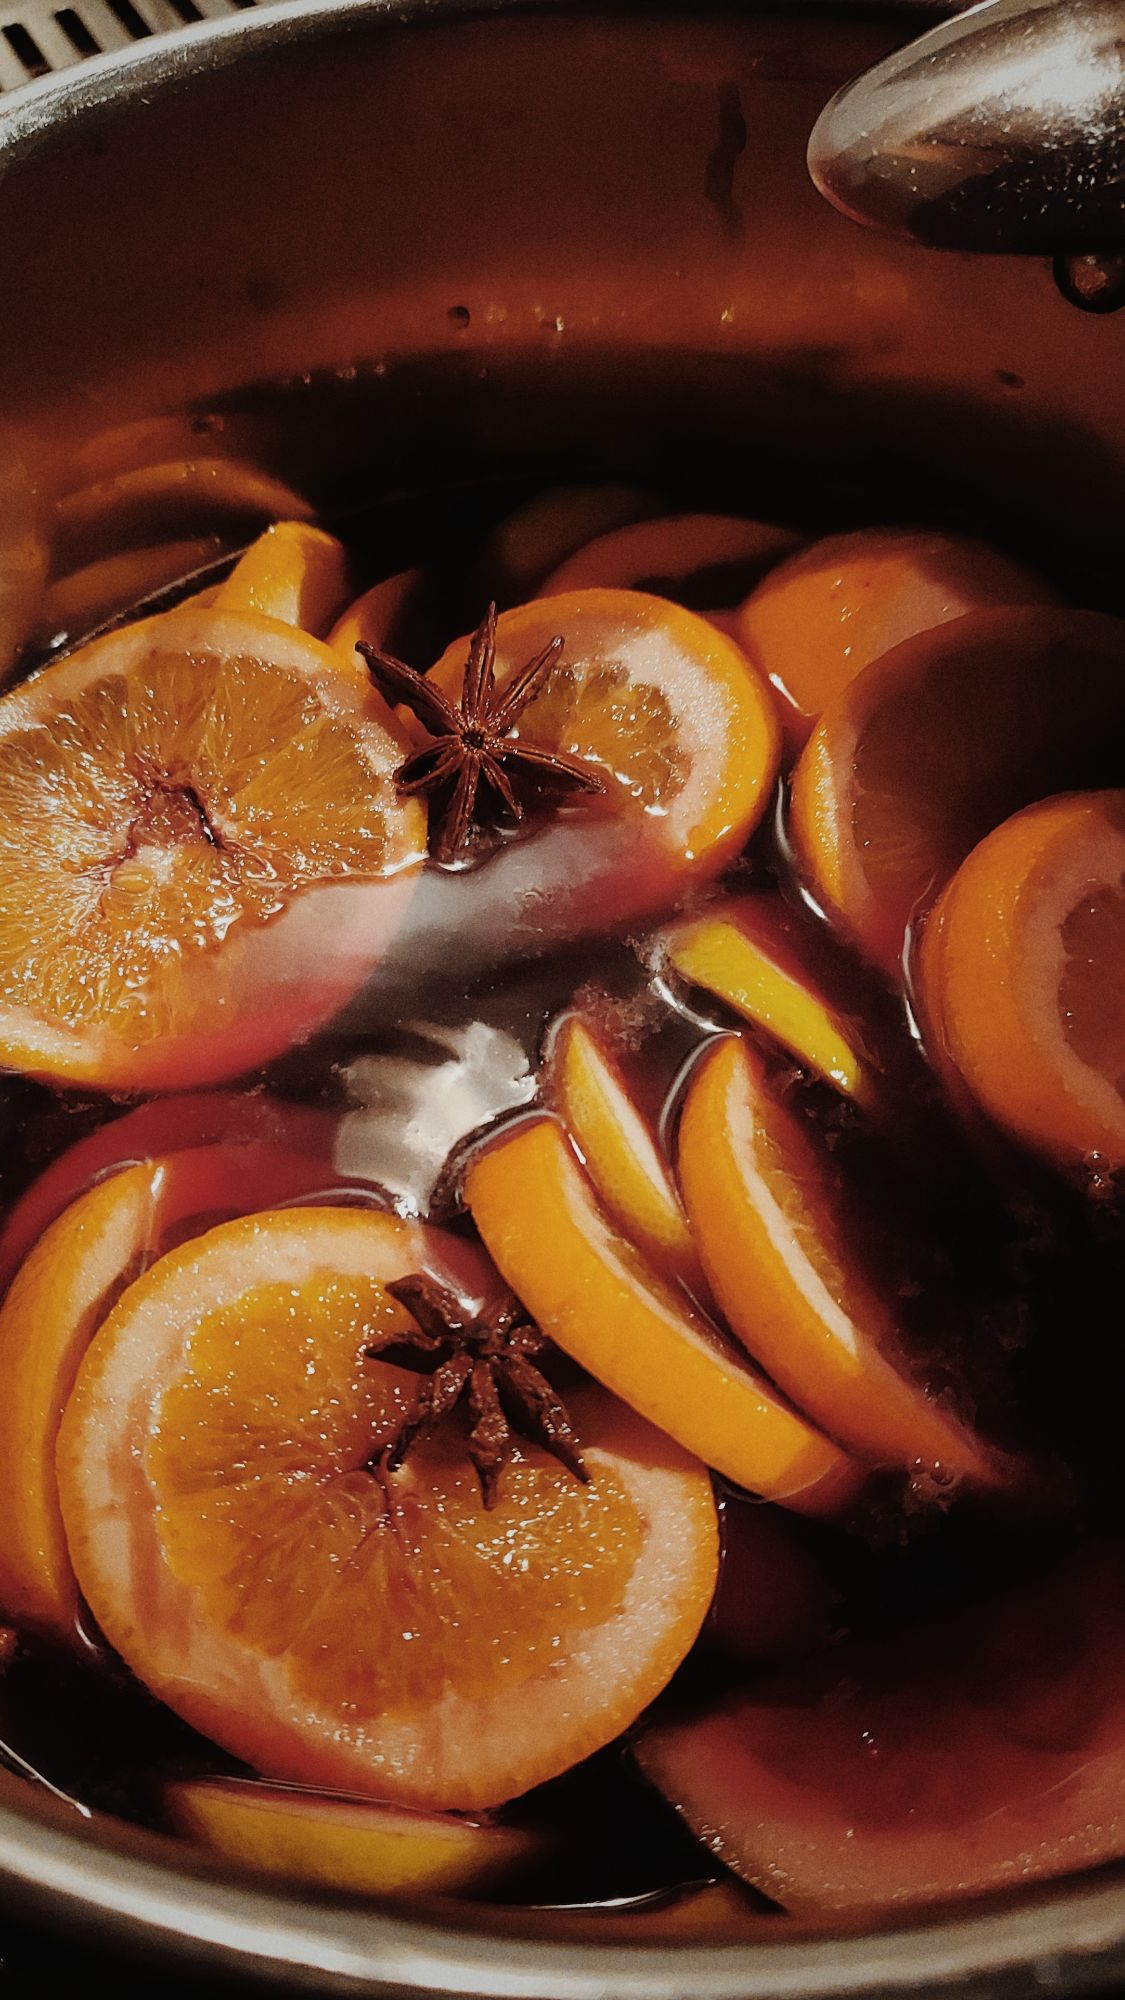 Slices of lemons and oranges in a pot of spiced red wine.